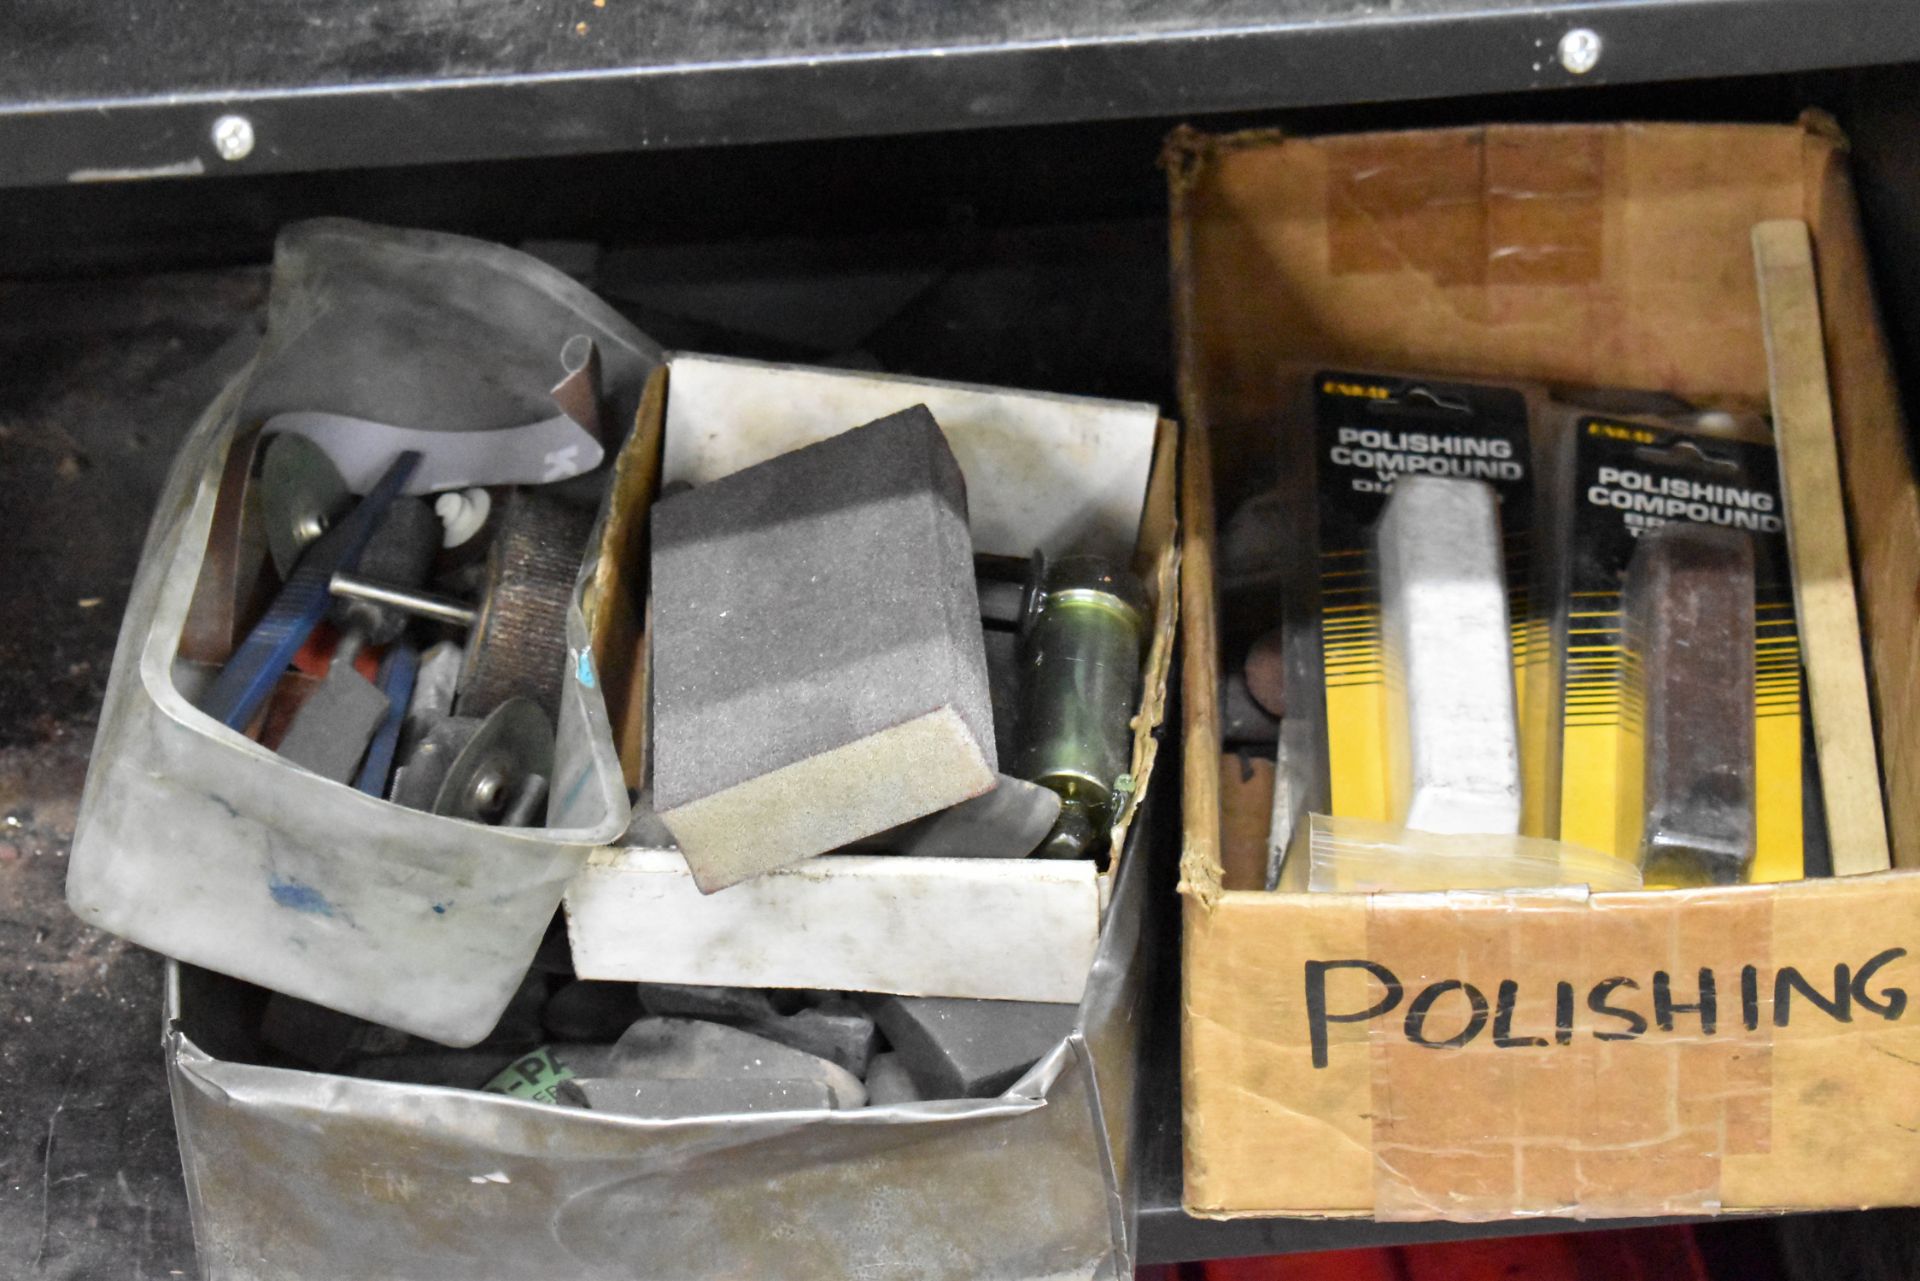 LOT/ CABINET WITH CONTENTS CONSISTING OF POLISHING SUPPLIES - Image 2 of 3